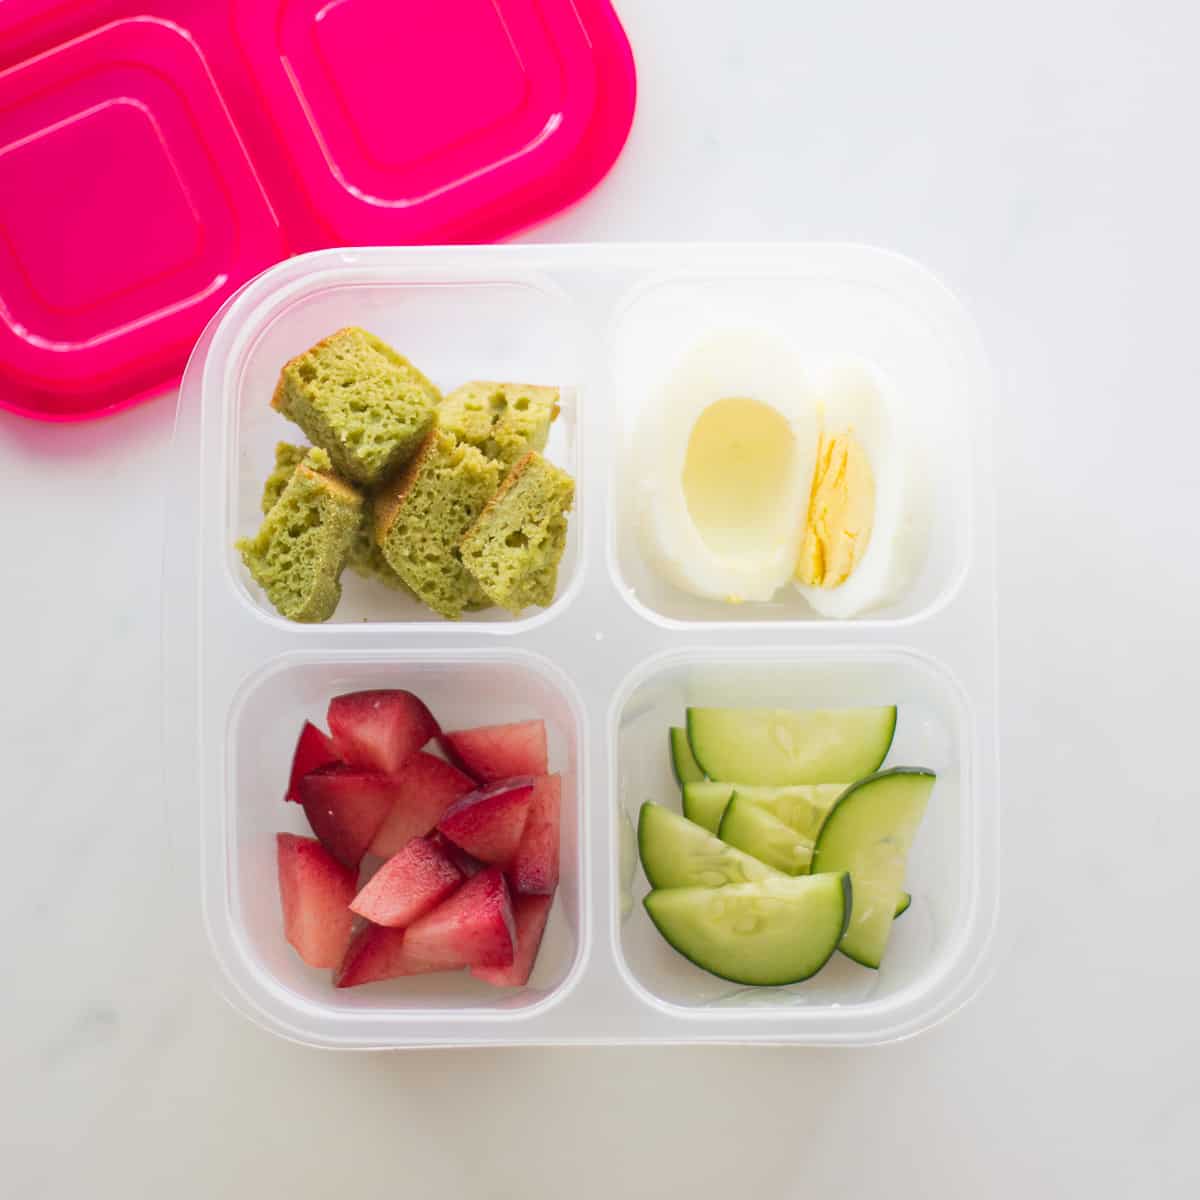 muffins, plums, cucumber, and hard boiled egg in plastic lunch box.